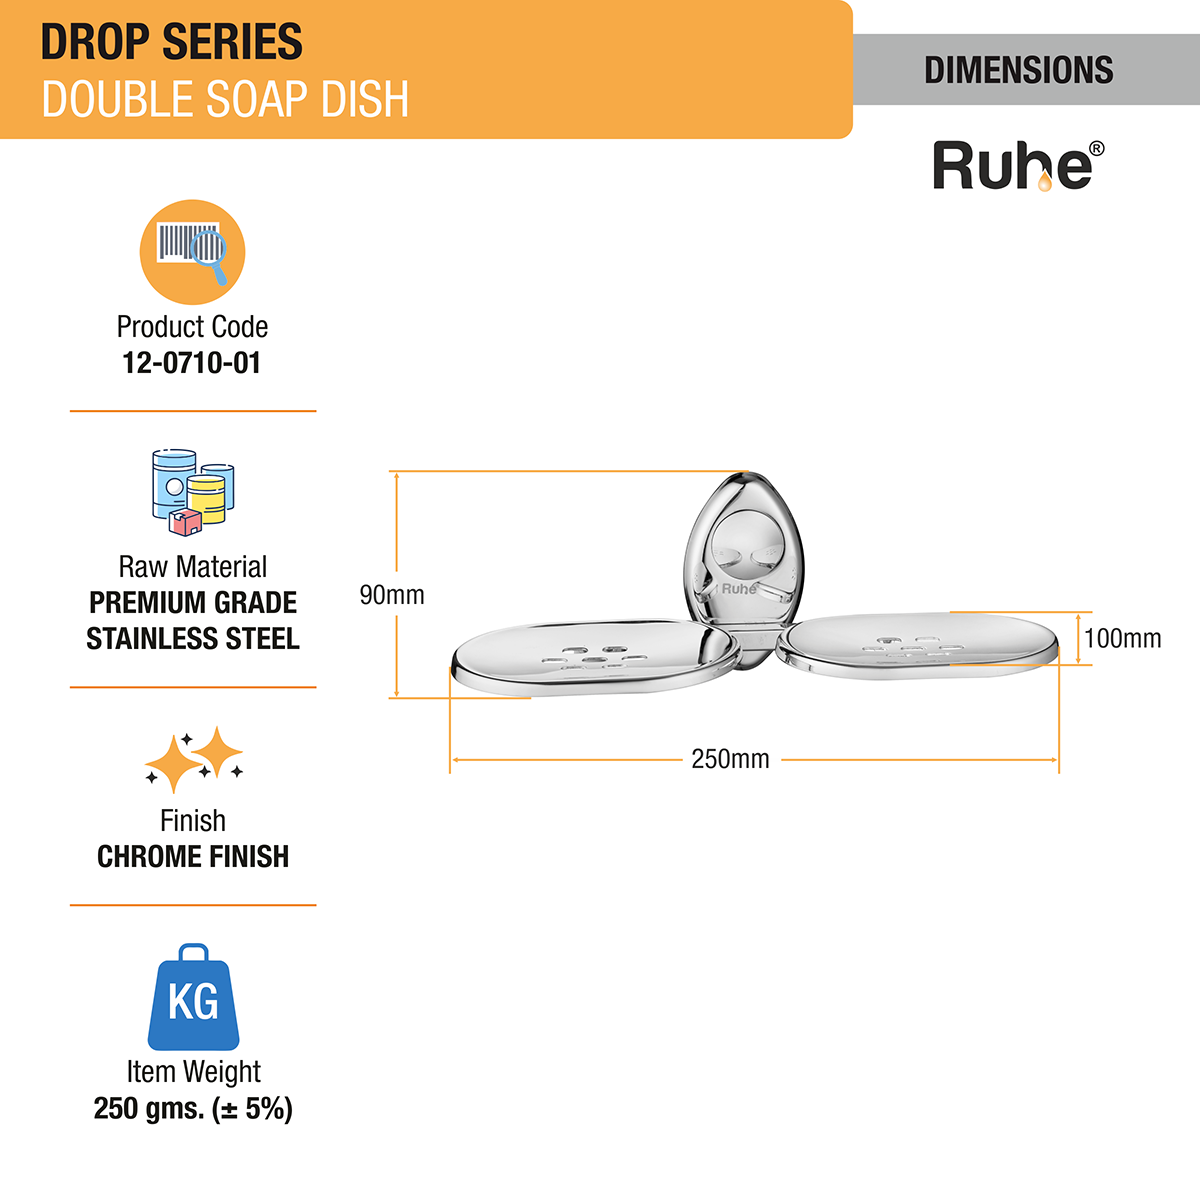 Drop Stainless Steel Double Soap Dish dimensions and sizes